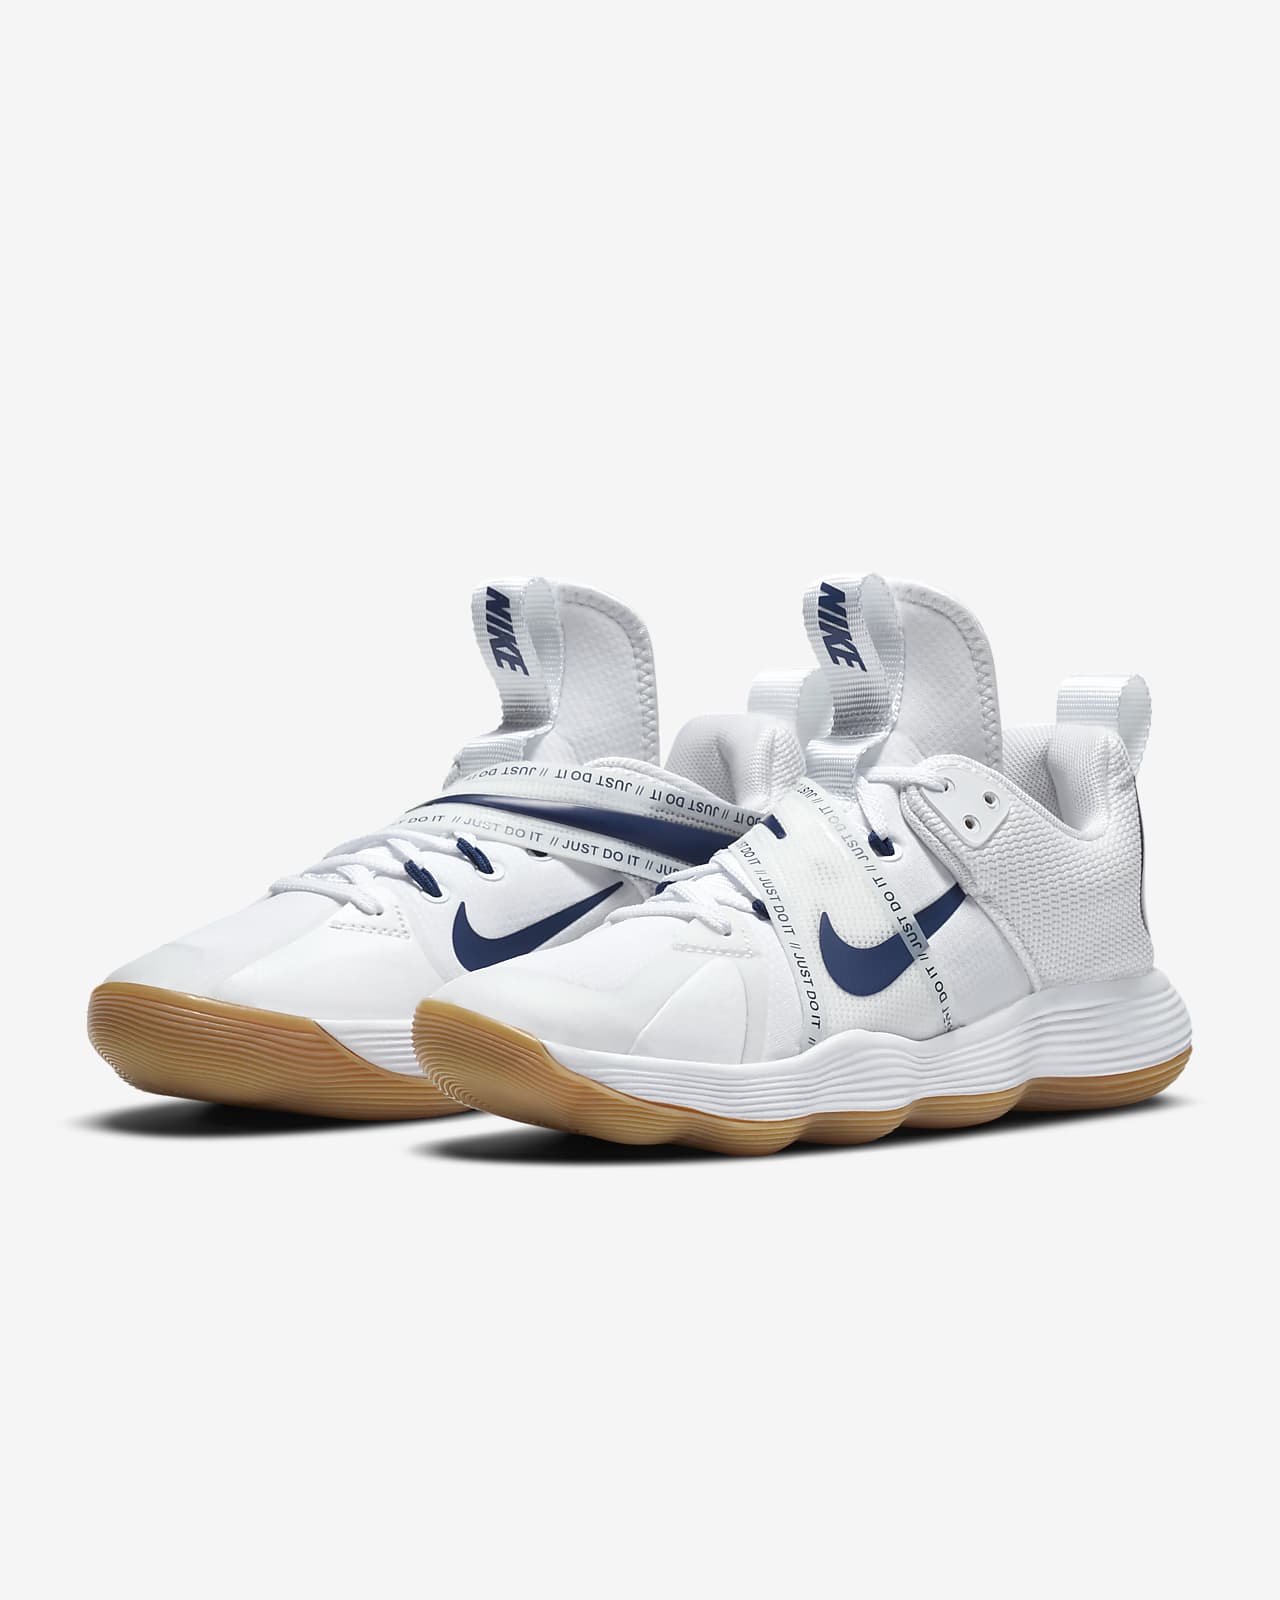 nike 2020 volleyball shoes